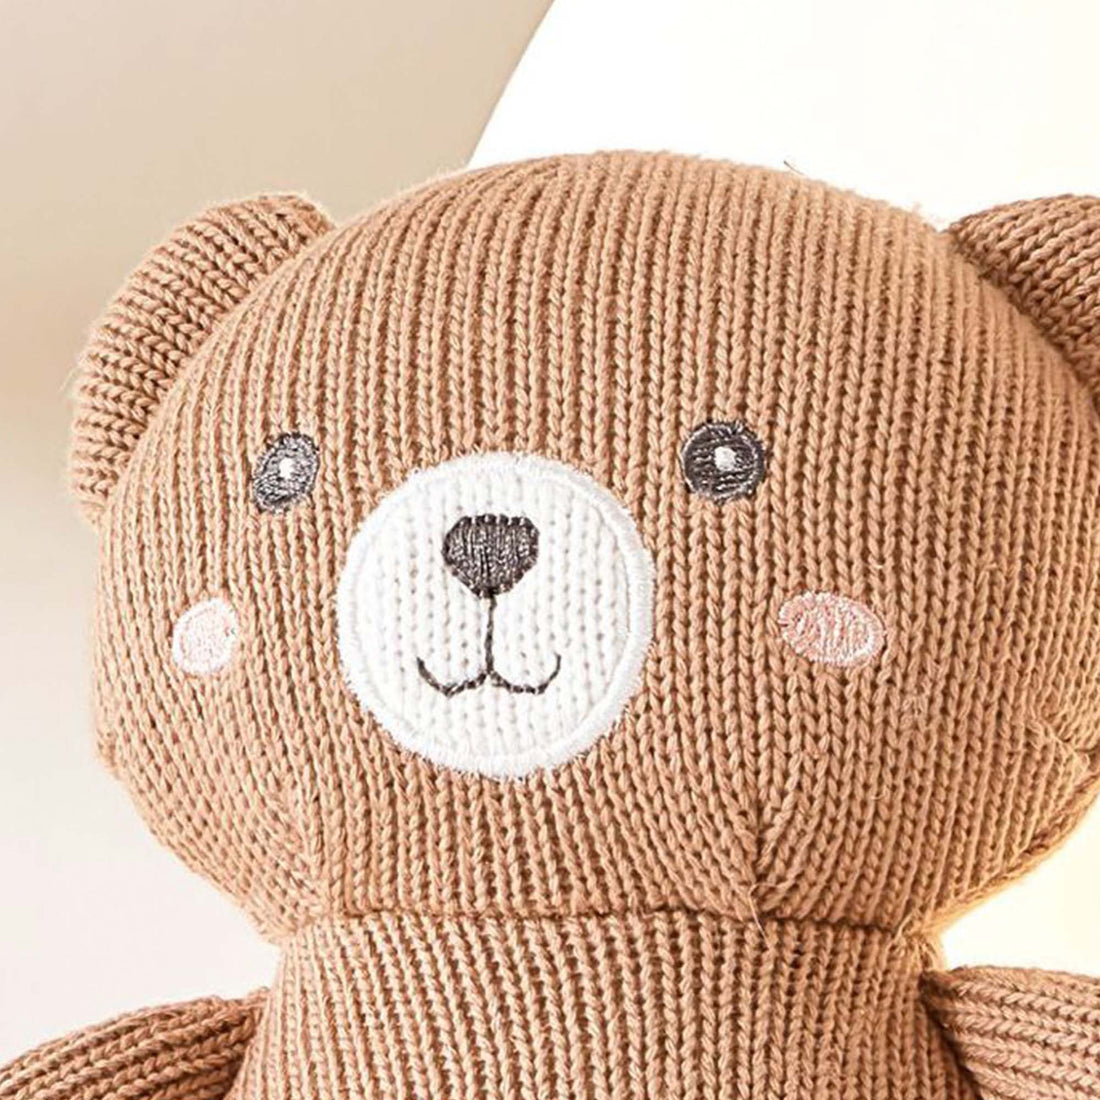 A close-up photo of a brown knitted teddy bear. The teddy bear has black button eyes, a stitched smile, and a black embroidered nose. It has a small pink patch sewn on its chest and is sitting on a white shelf.